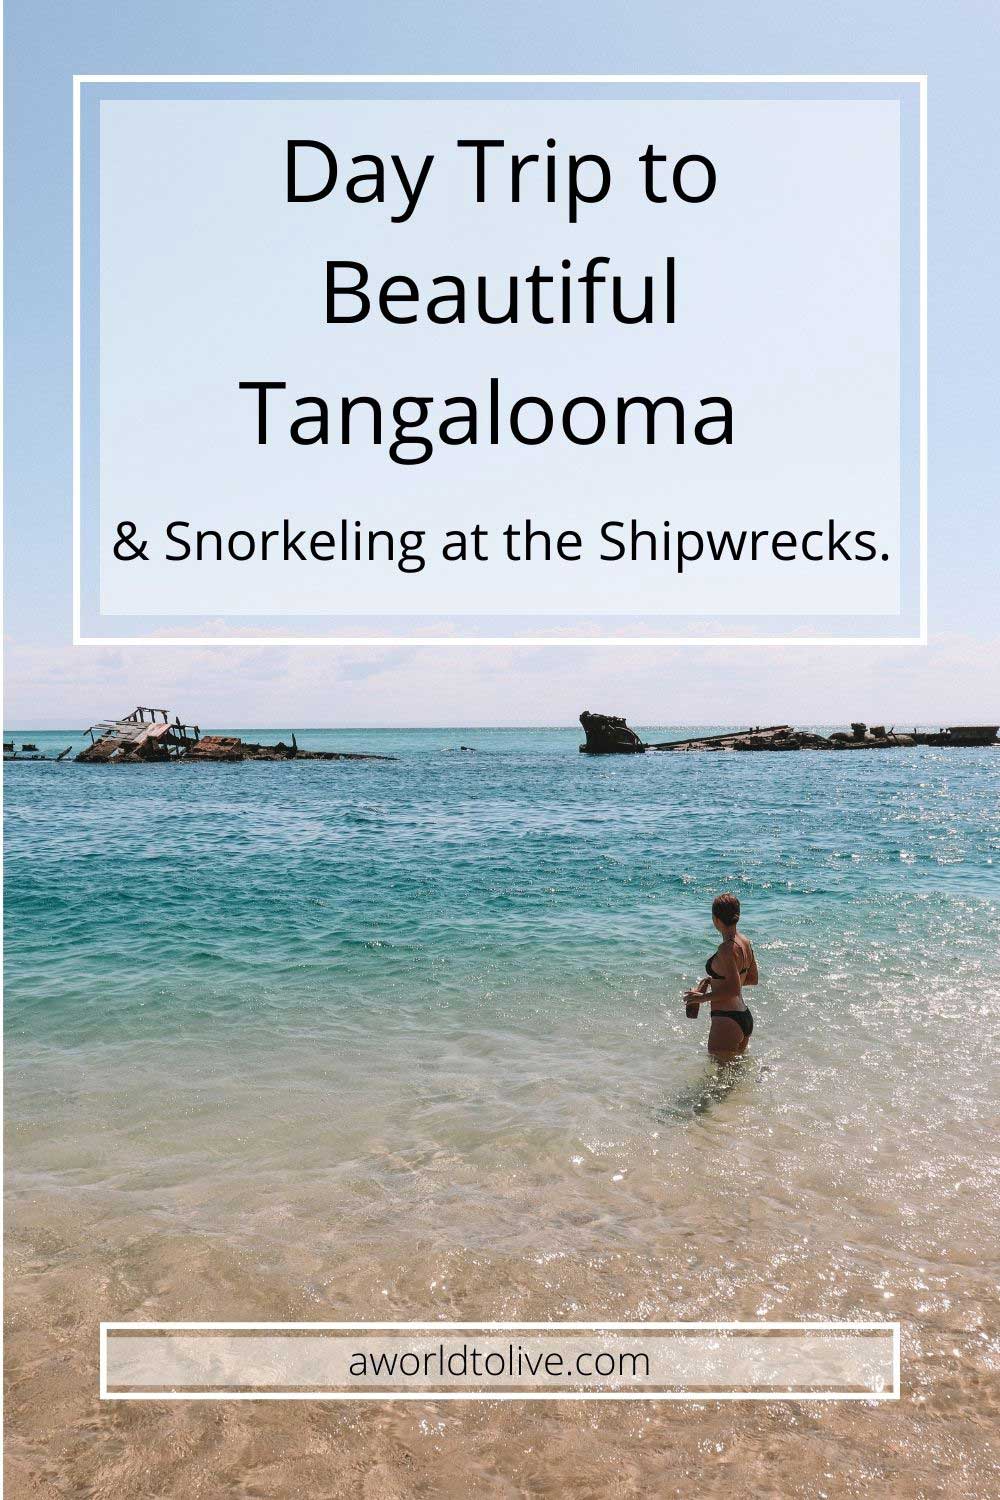 Elyse standing in the shallow water at Tangalooma island resort looking out to the many shipwrecks, holding her sun hat. Text over image with title of blog